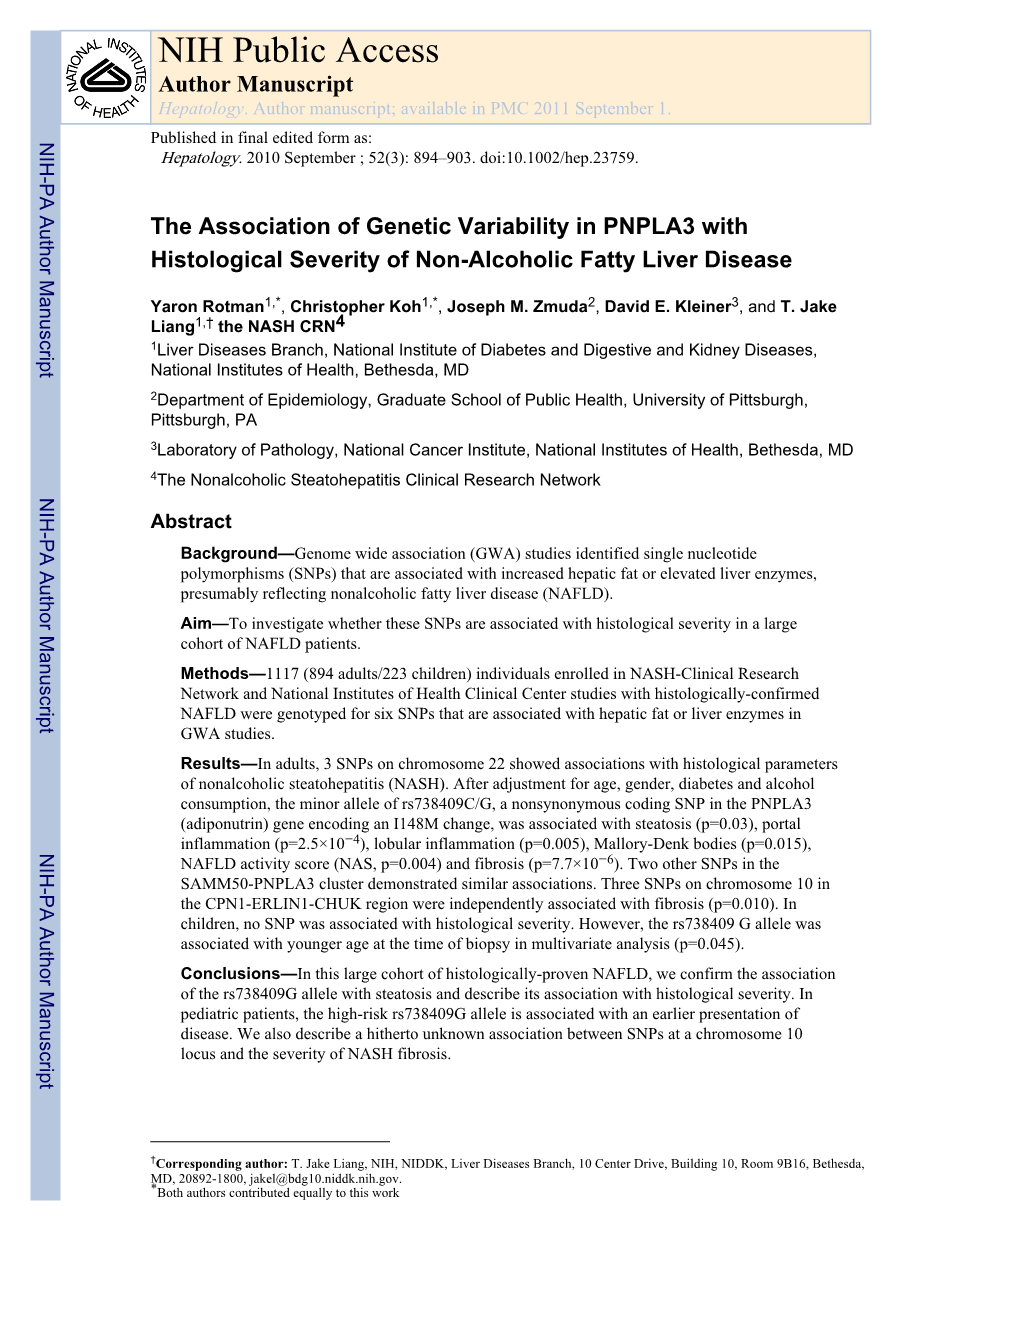 The Association of Genetic Variability in PNPLA3 with Histological Severity of Non-Alcoholic Fatty Liver Disease